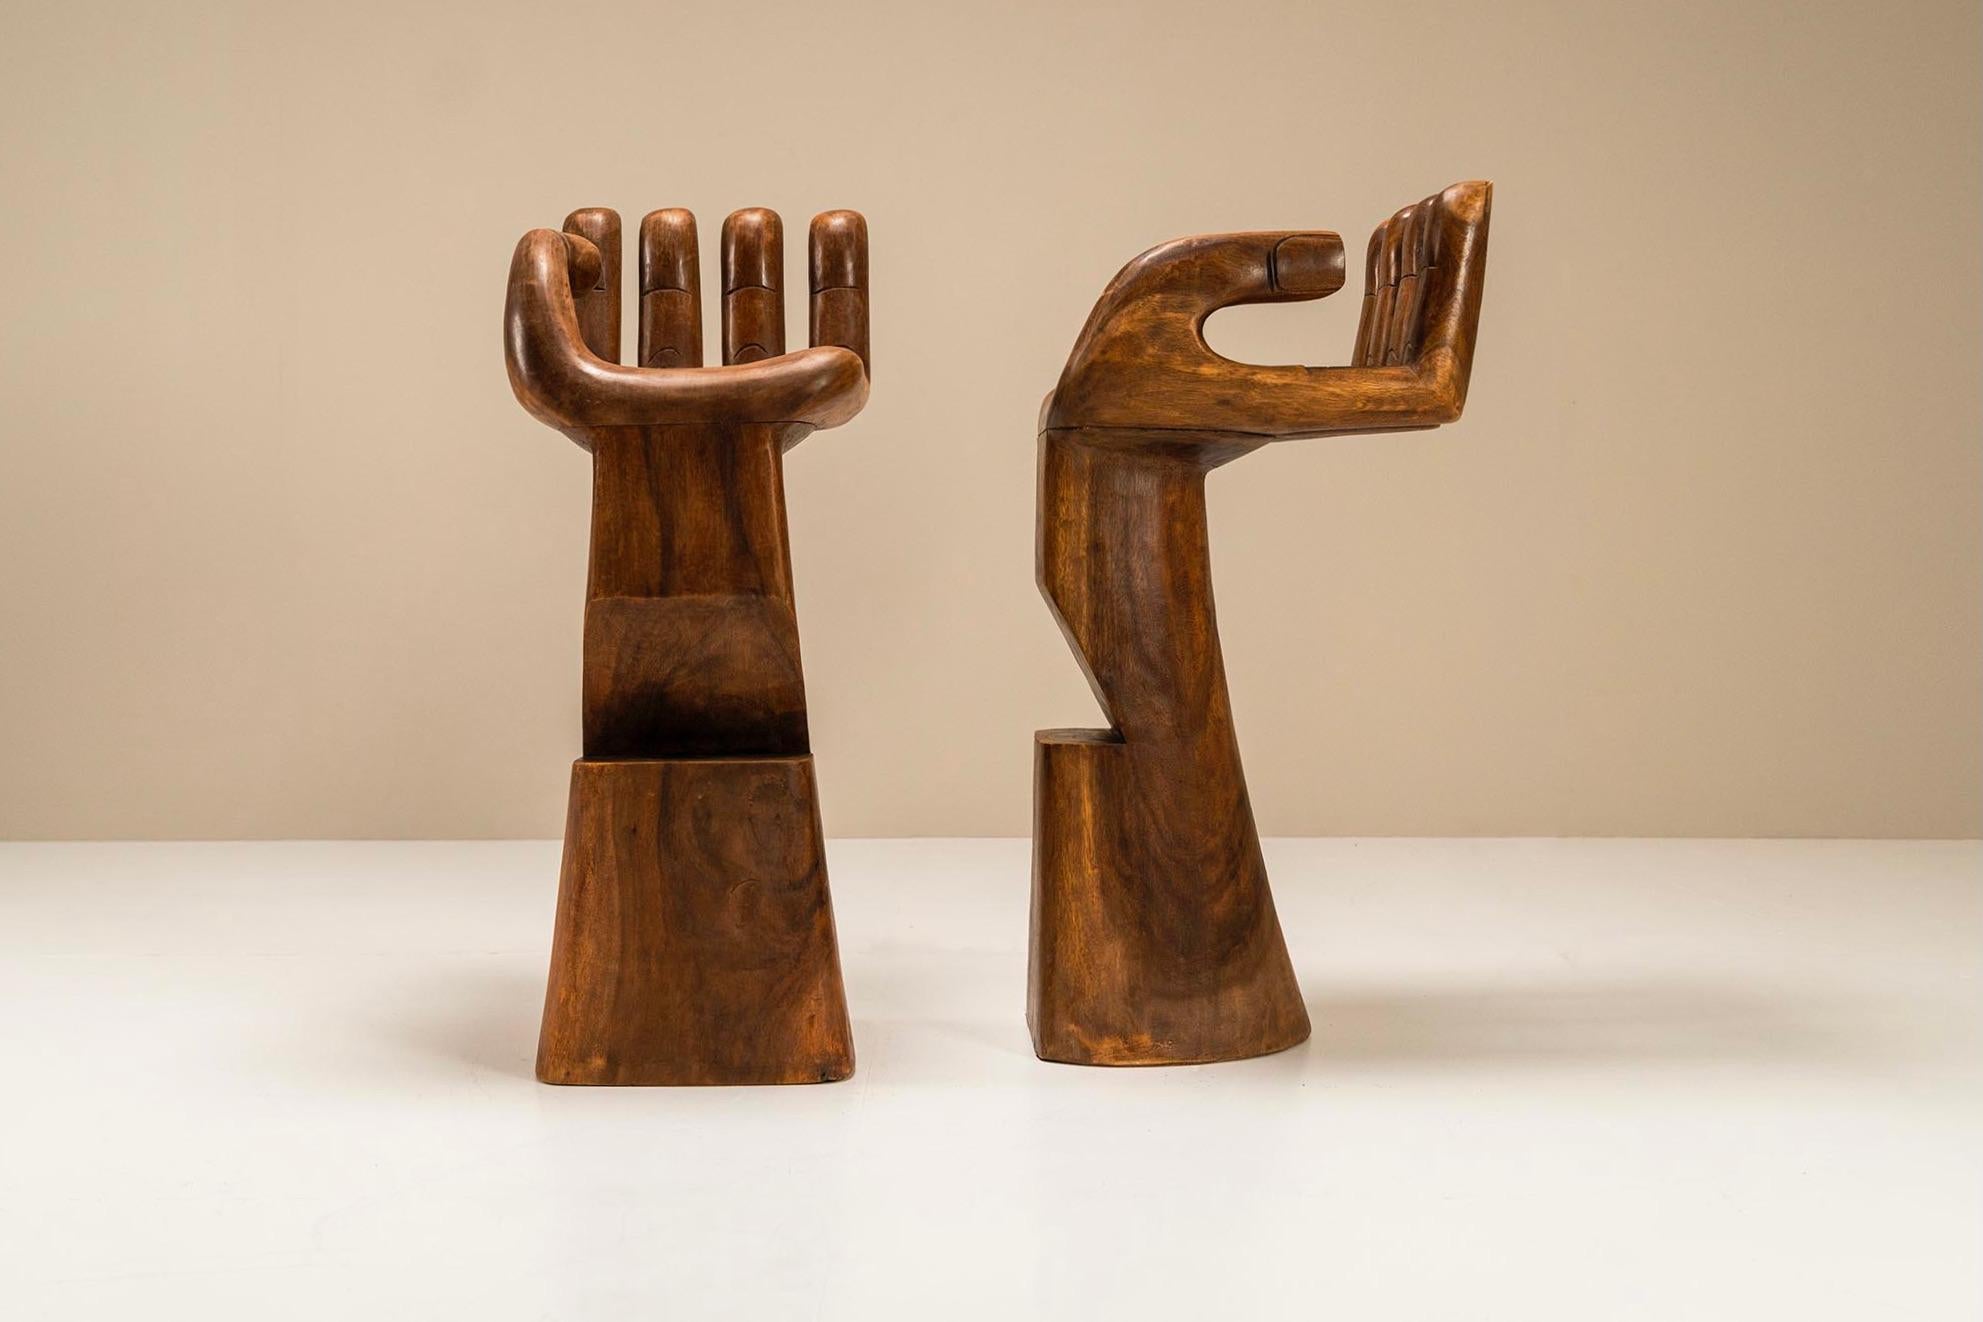 These two wooden sculptural bar stools are handmade in the 1970s and have a unique appearance. They consist of two pieces of wood, the base, and the seat. A sturdy base is provided with a notch halfway through to rest your feet on it. The foot flows